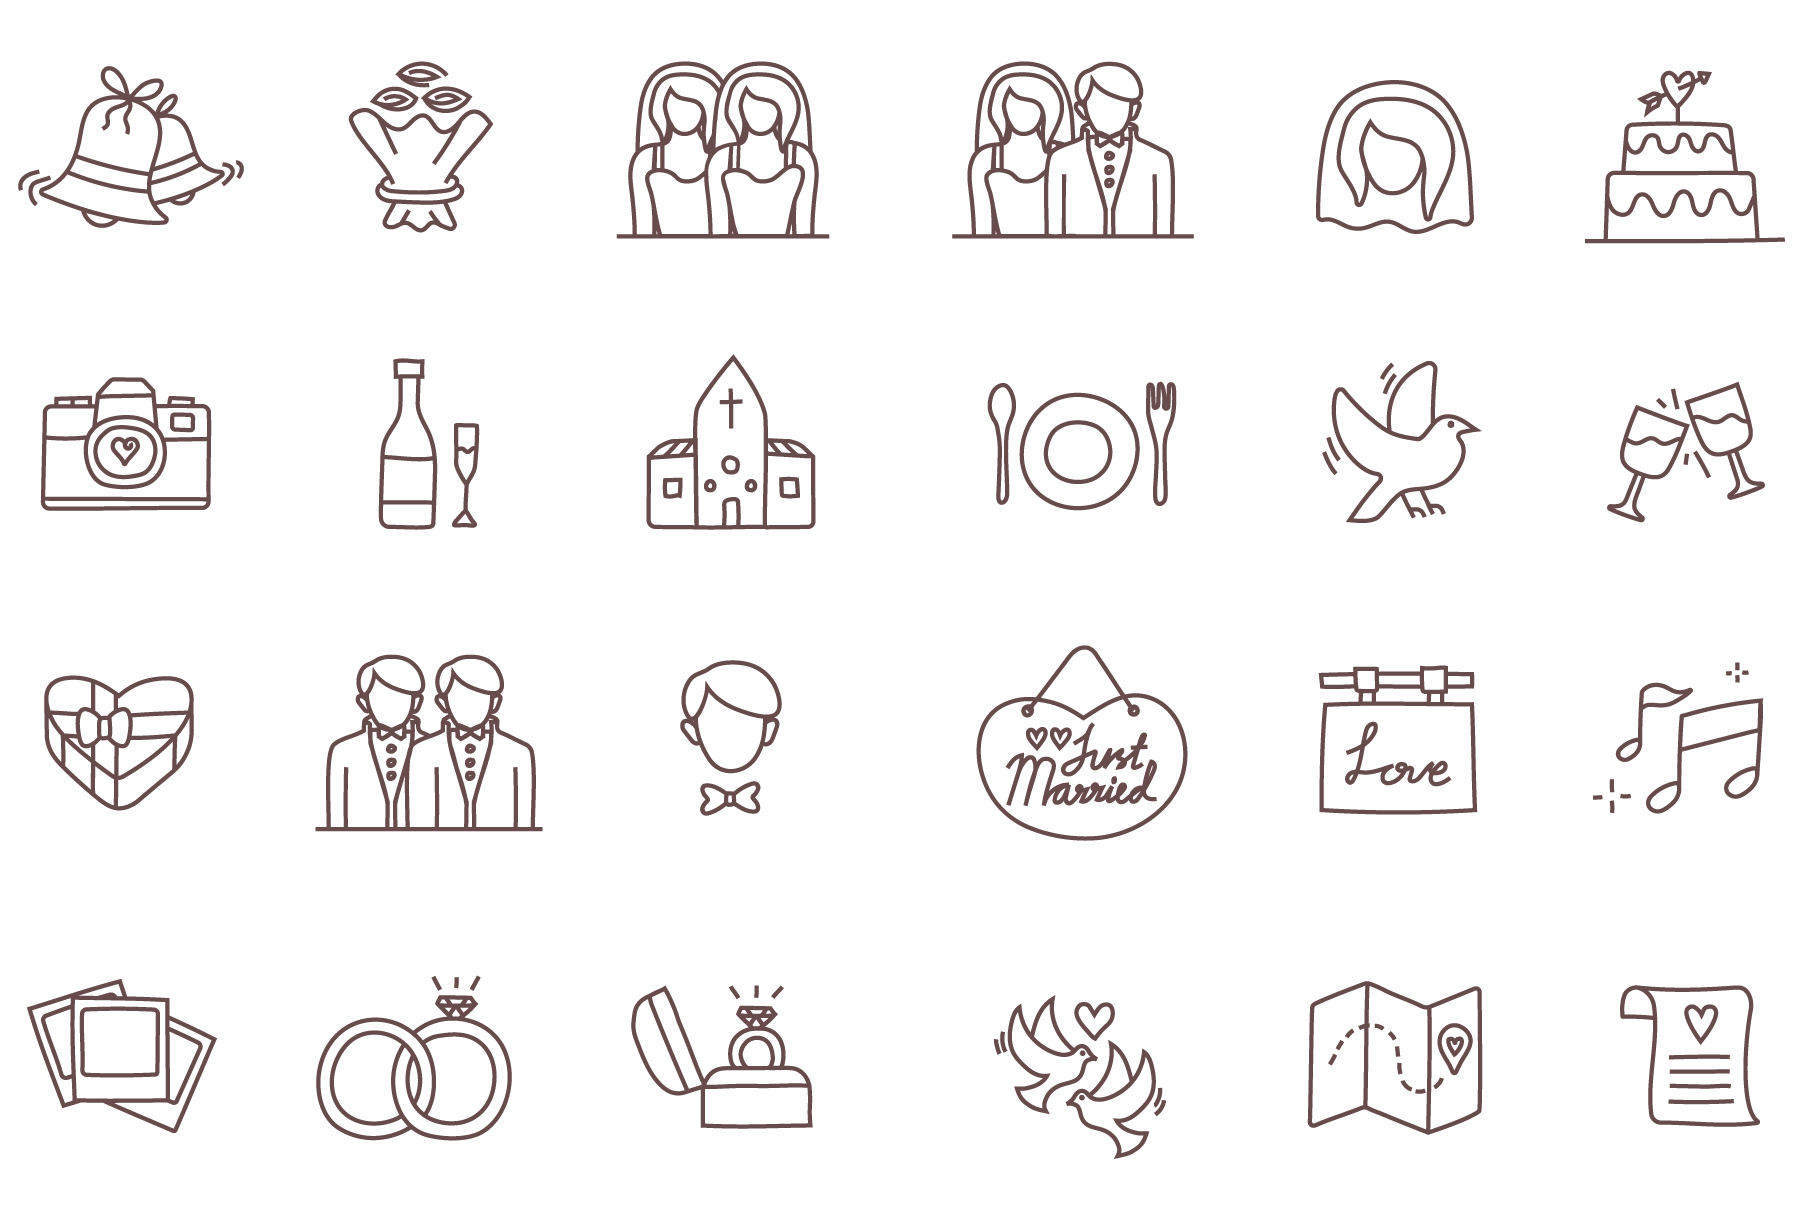 Download 24 Free Wedding Icons By Temploola Linseed Studio Premium And Free Graphic Design Assets